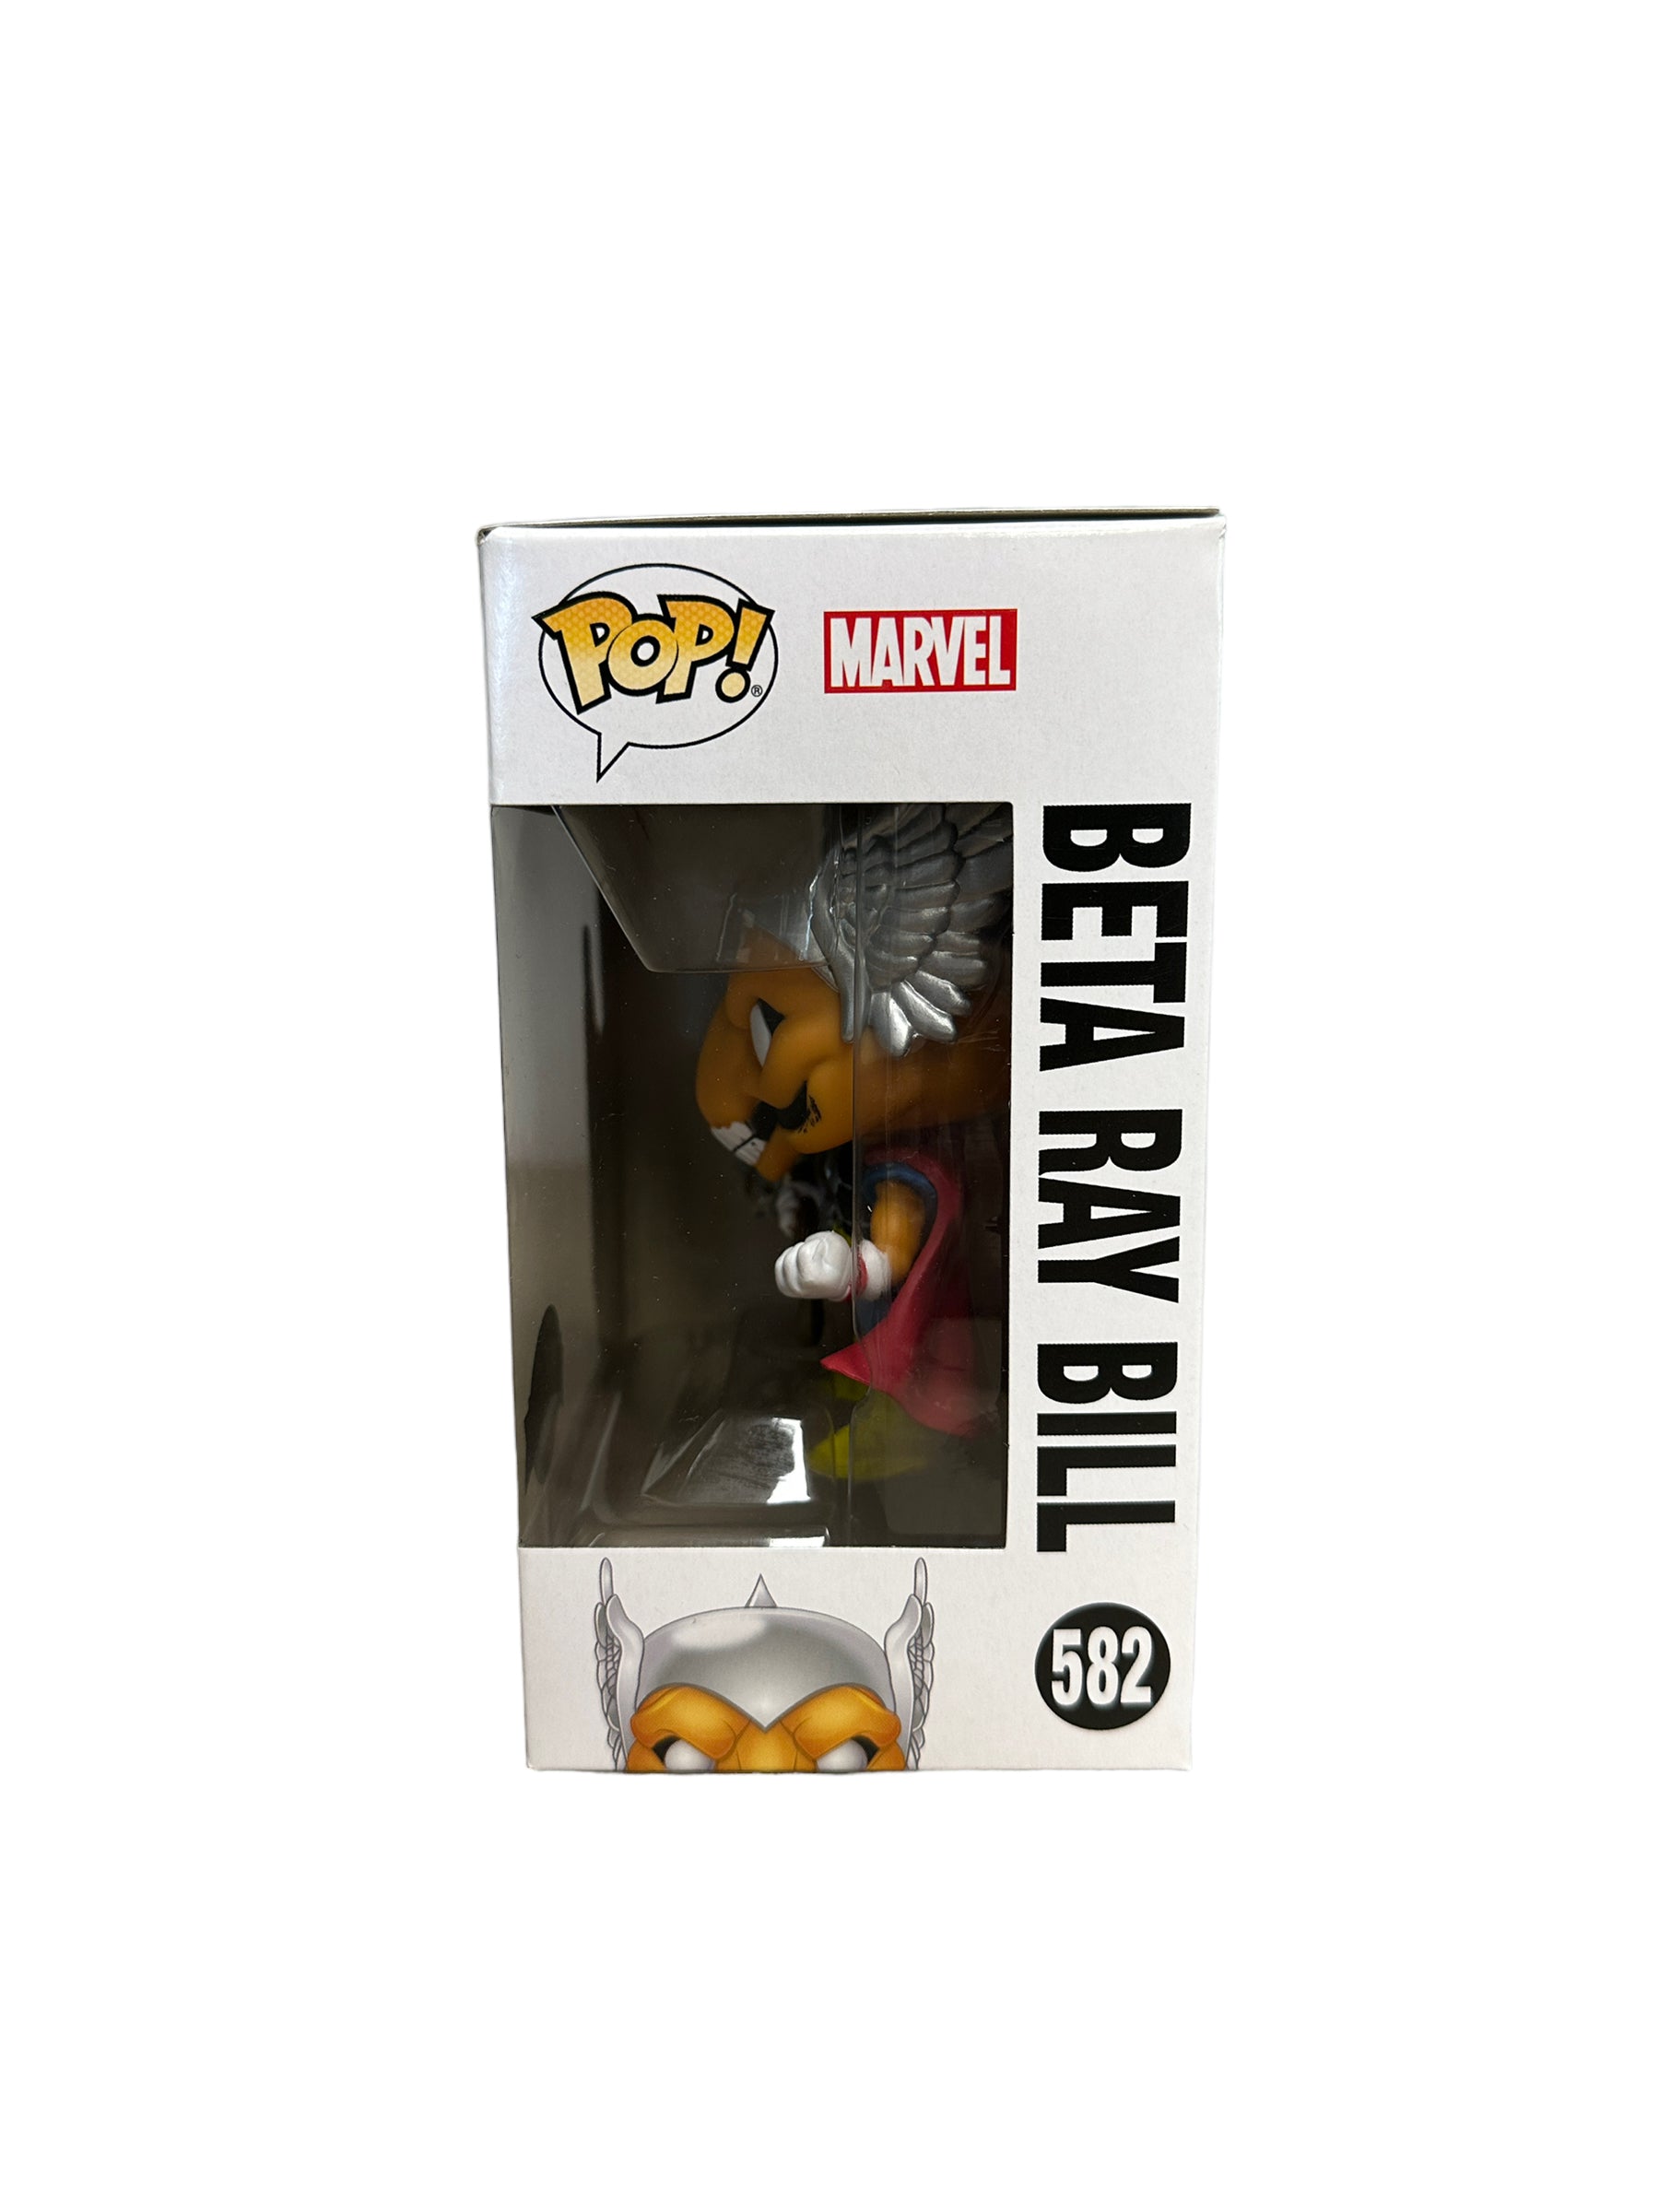 Beta Ray Bill #582 Funko Pop! - Marvel 80 Years - Special Edition - Condition 9.5/10